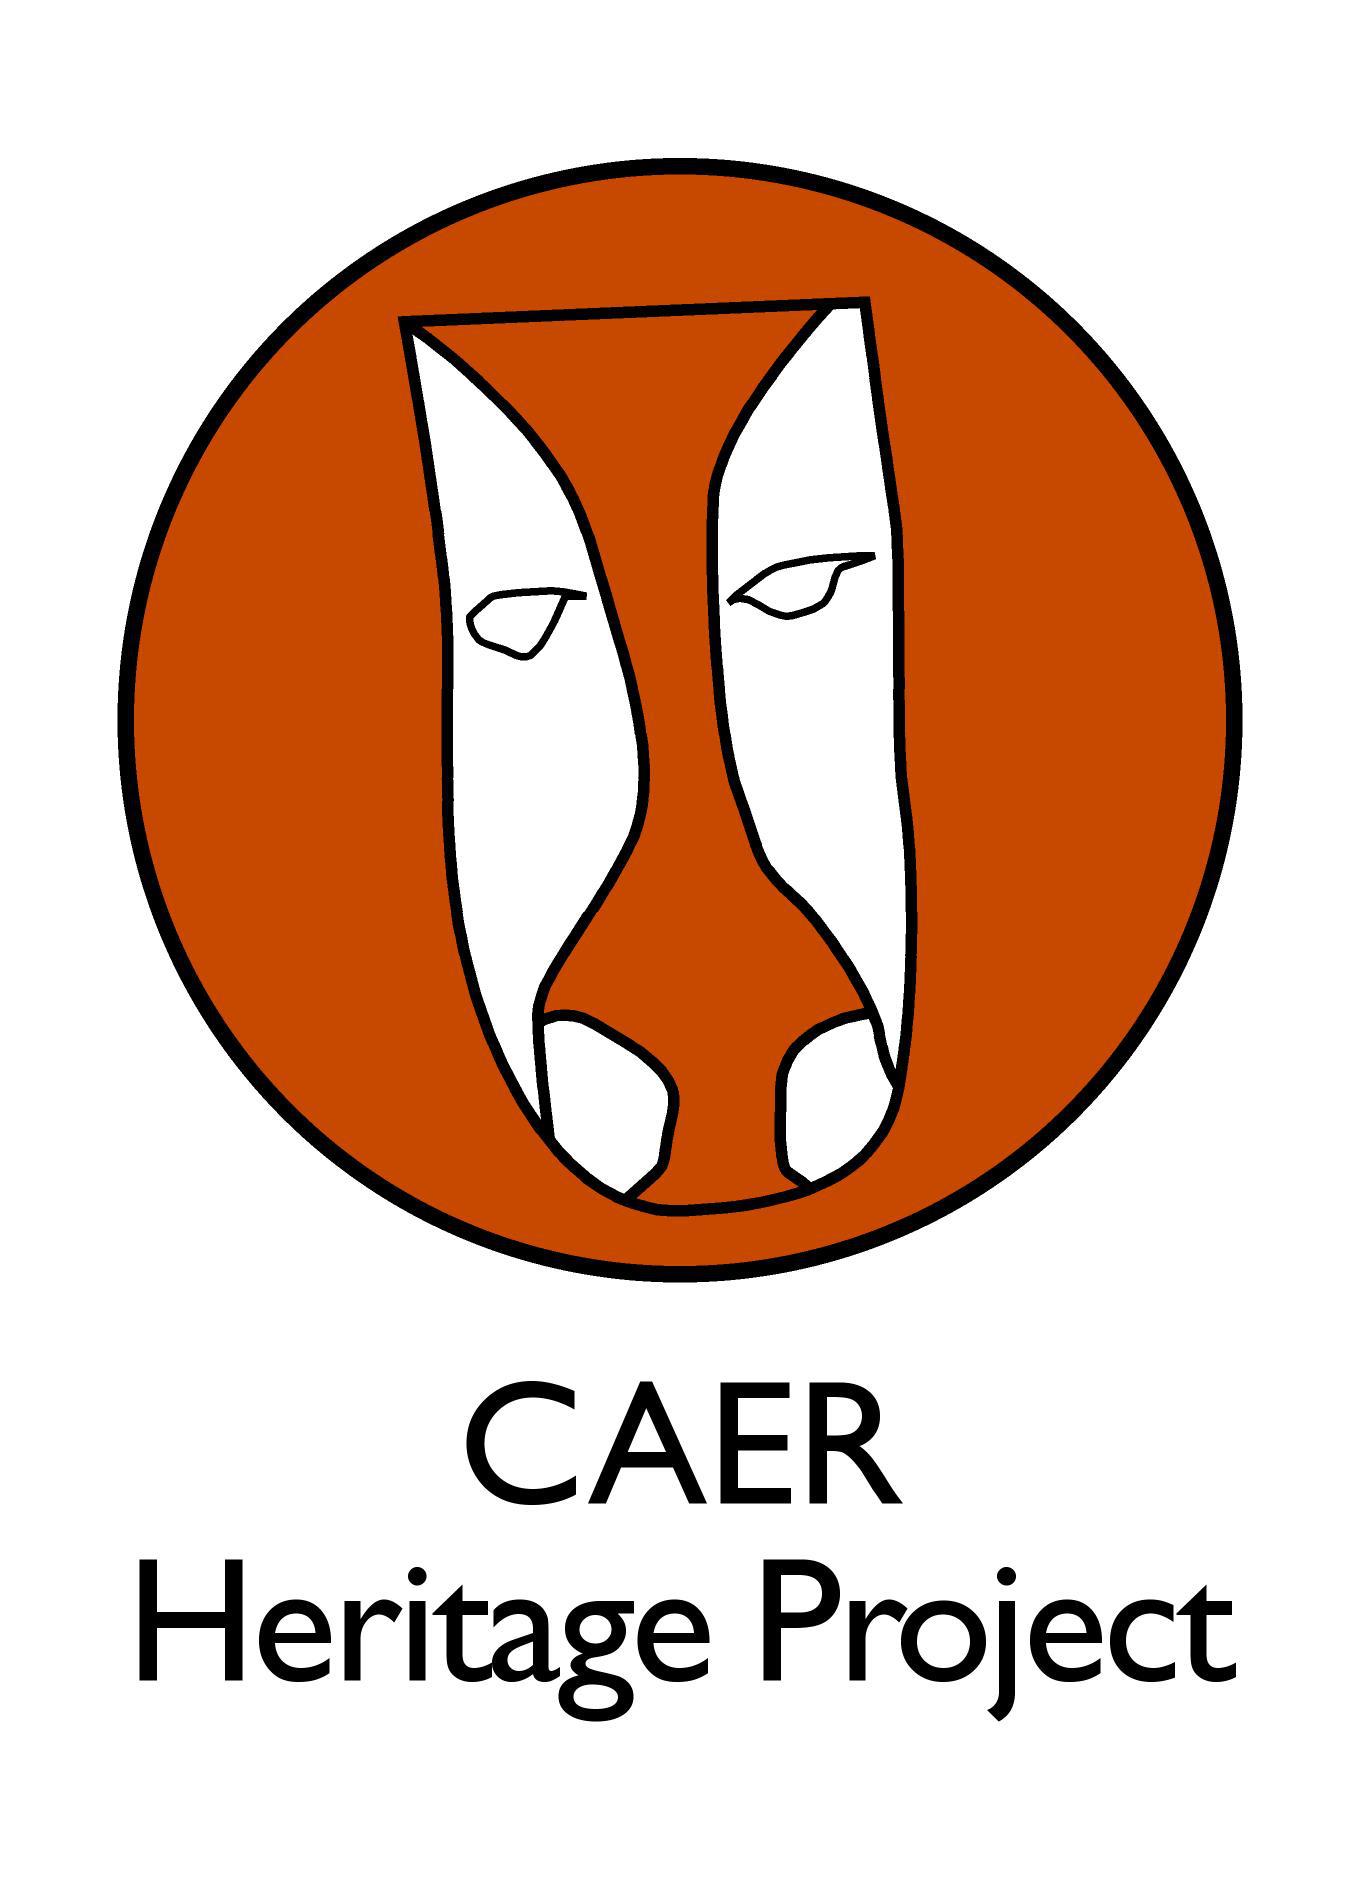 CAER Heritage Project